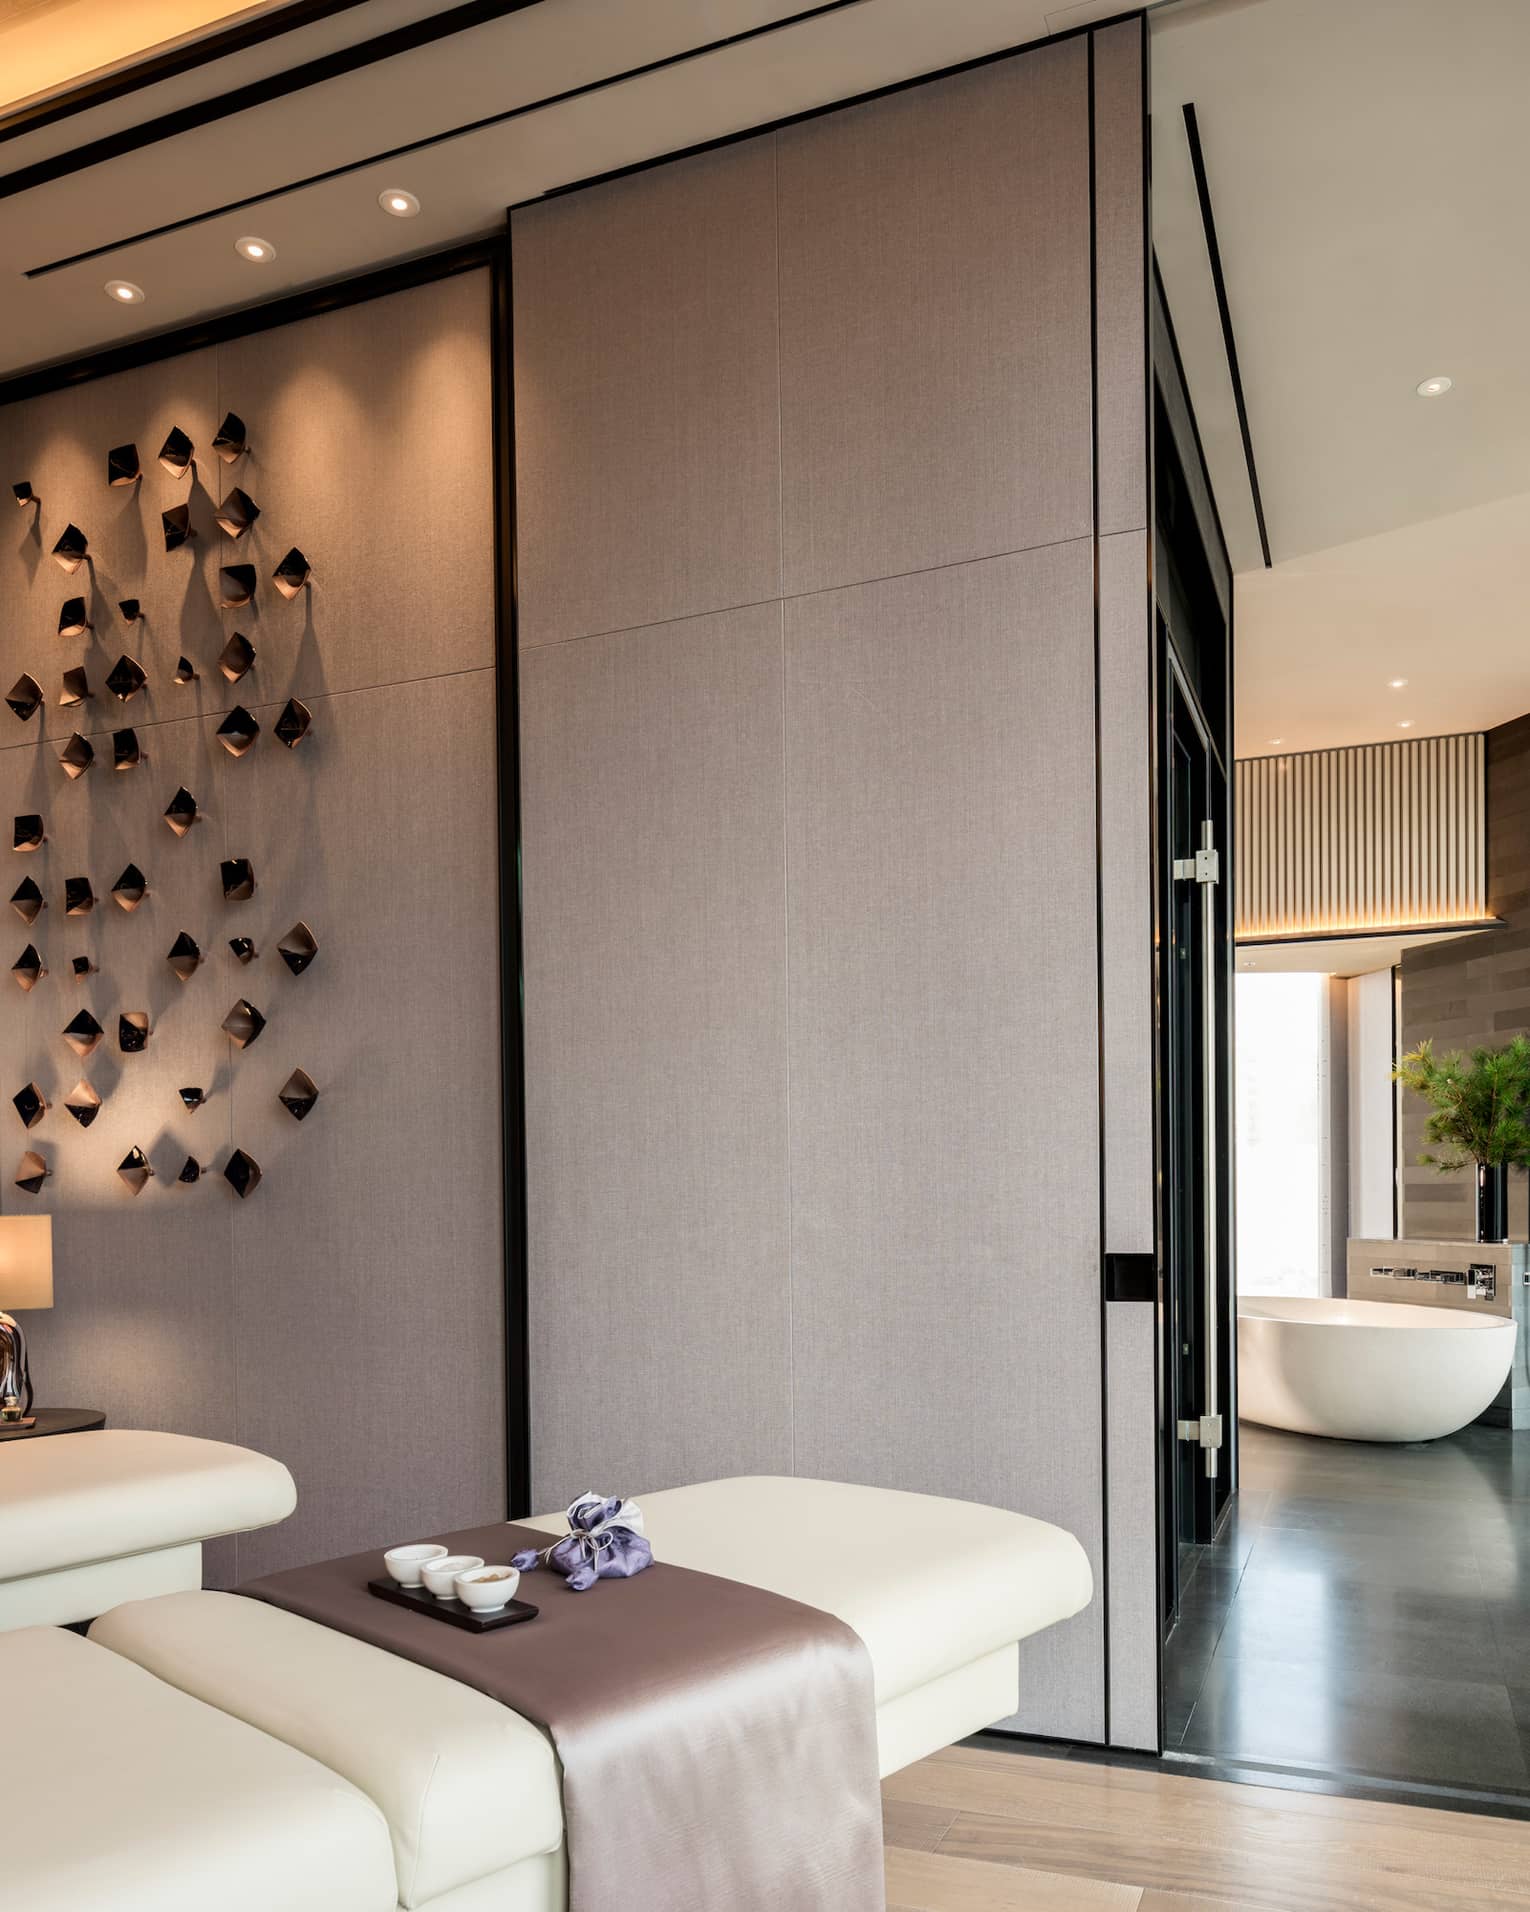 Couples massage beds under modern wall sculptures by hall leading to spa tub